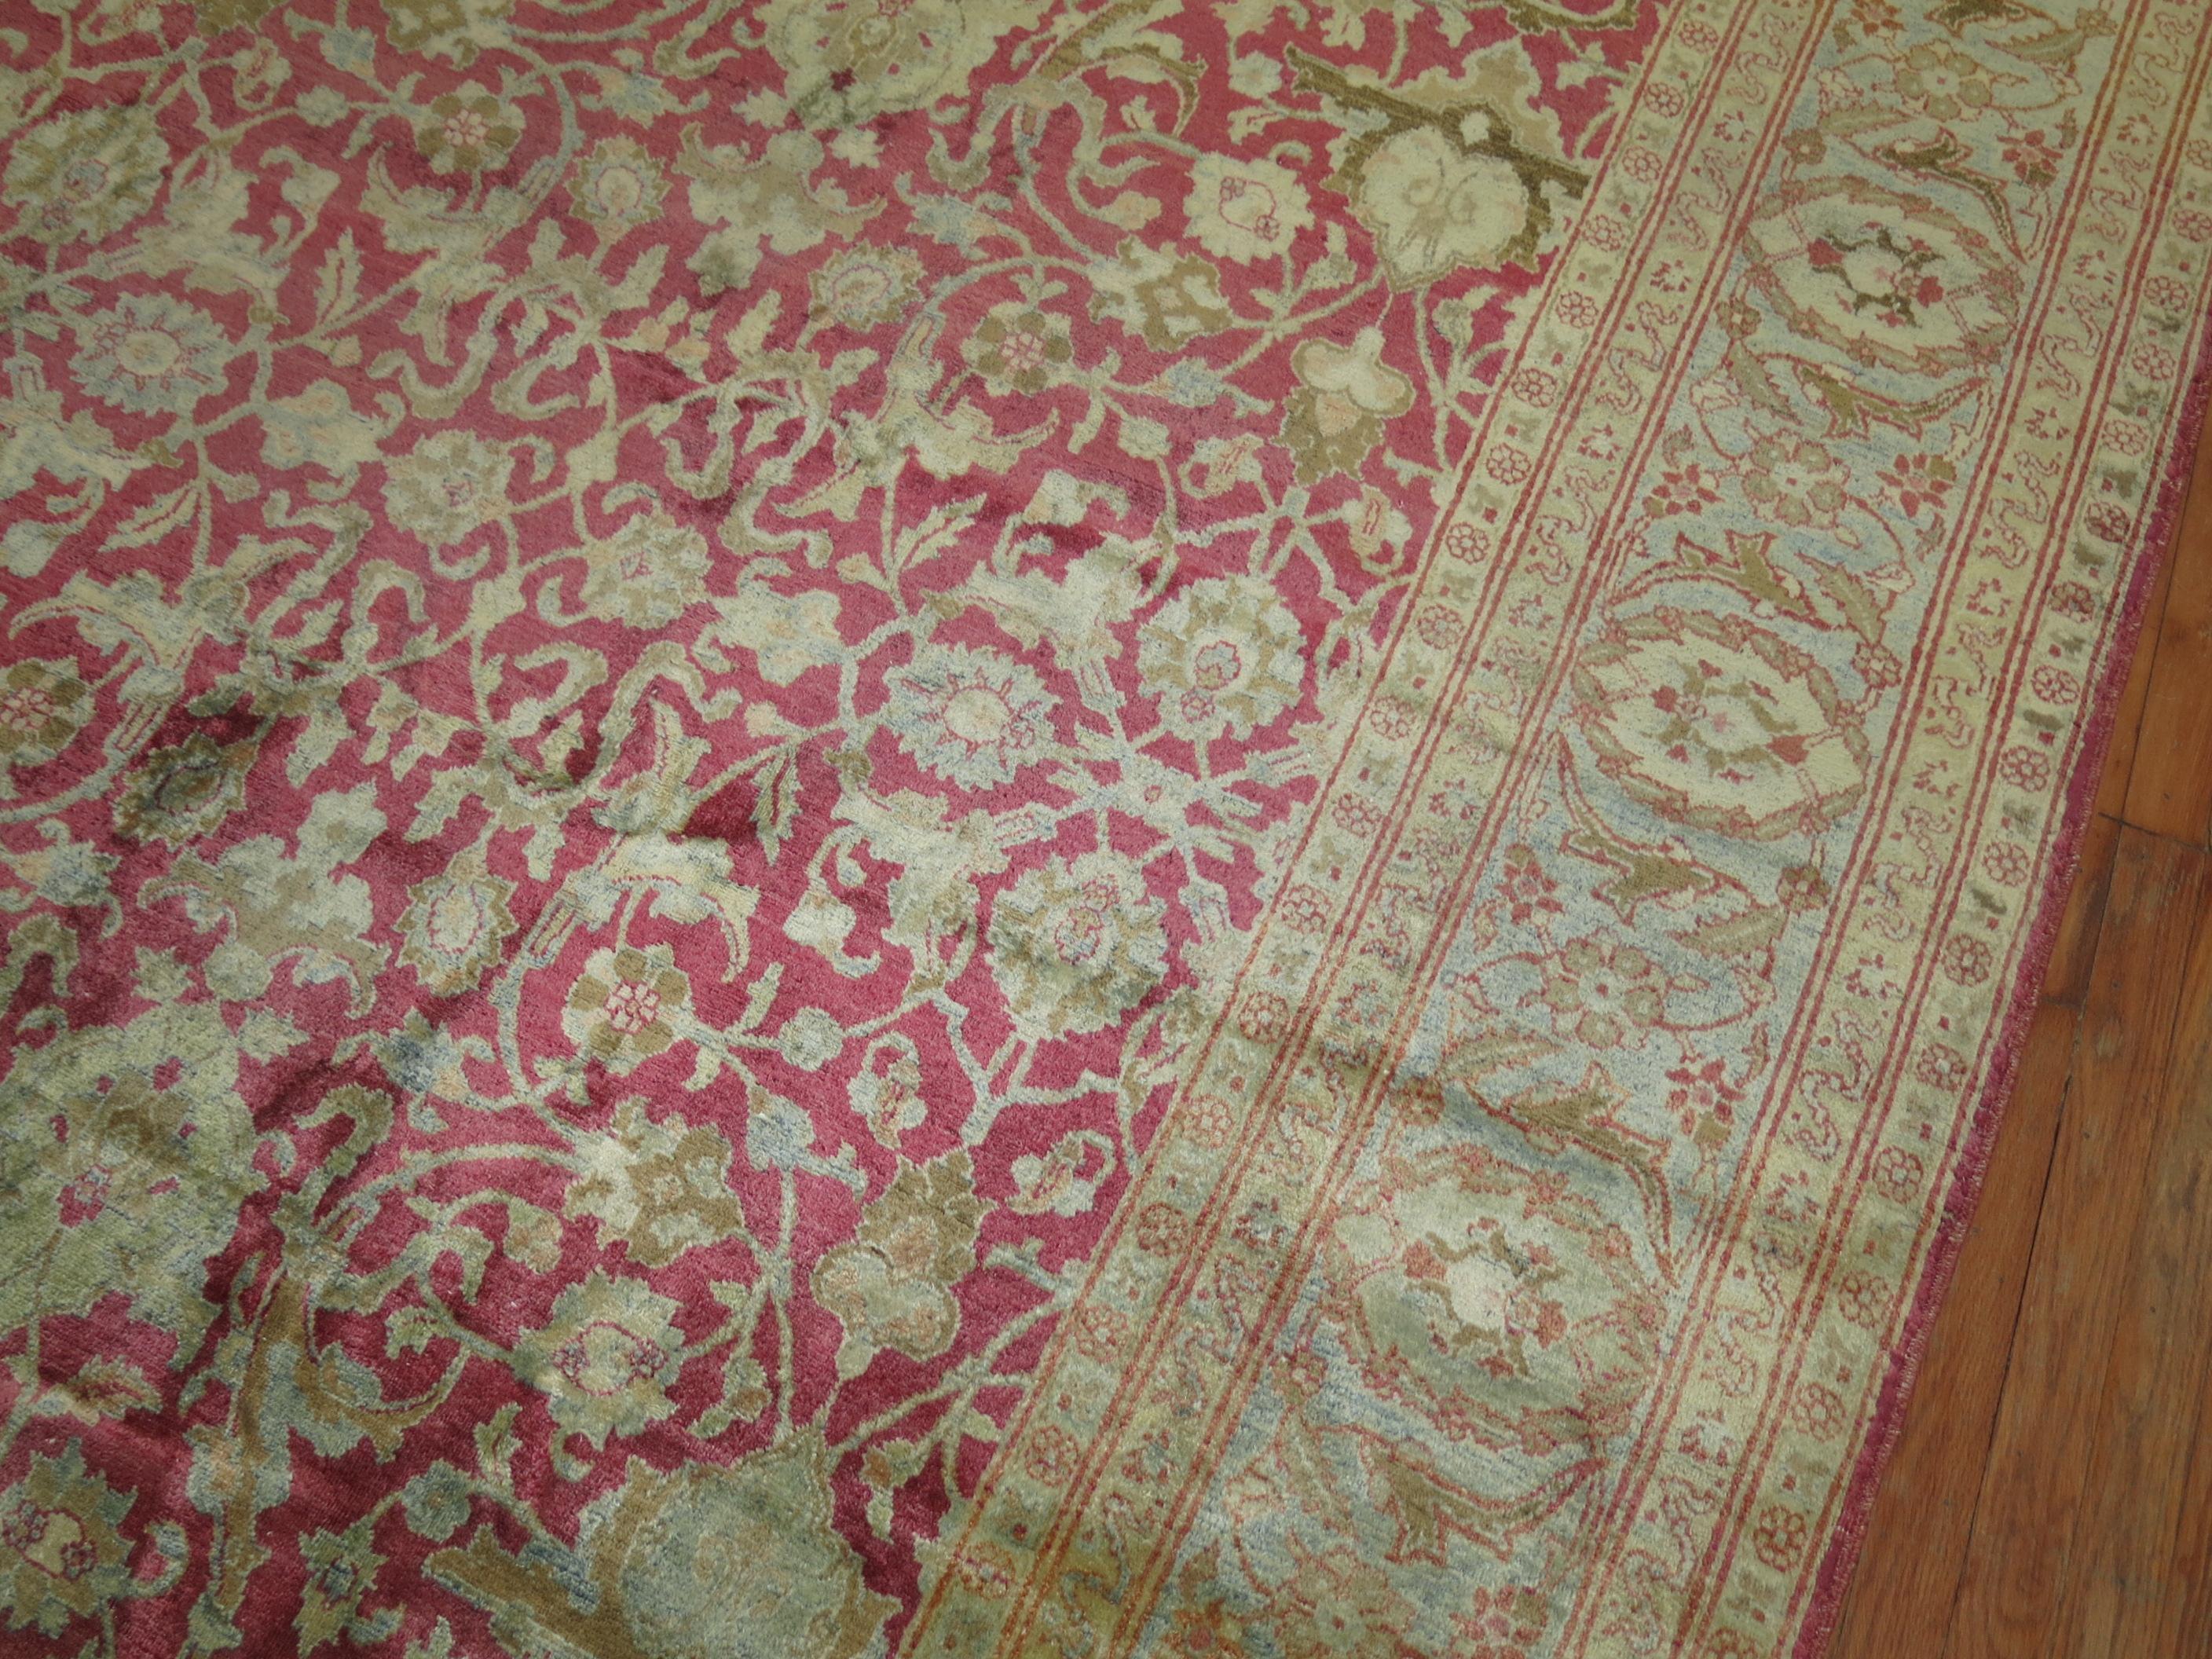 Hand-Woven Raspberry Icy Blue Oversize Persian Tabriz Rug, Early 20th Century For Sale